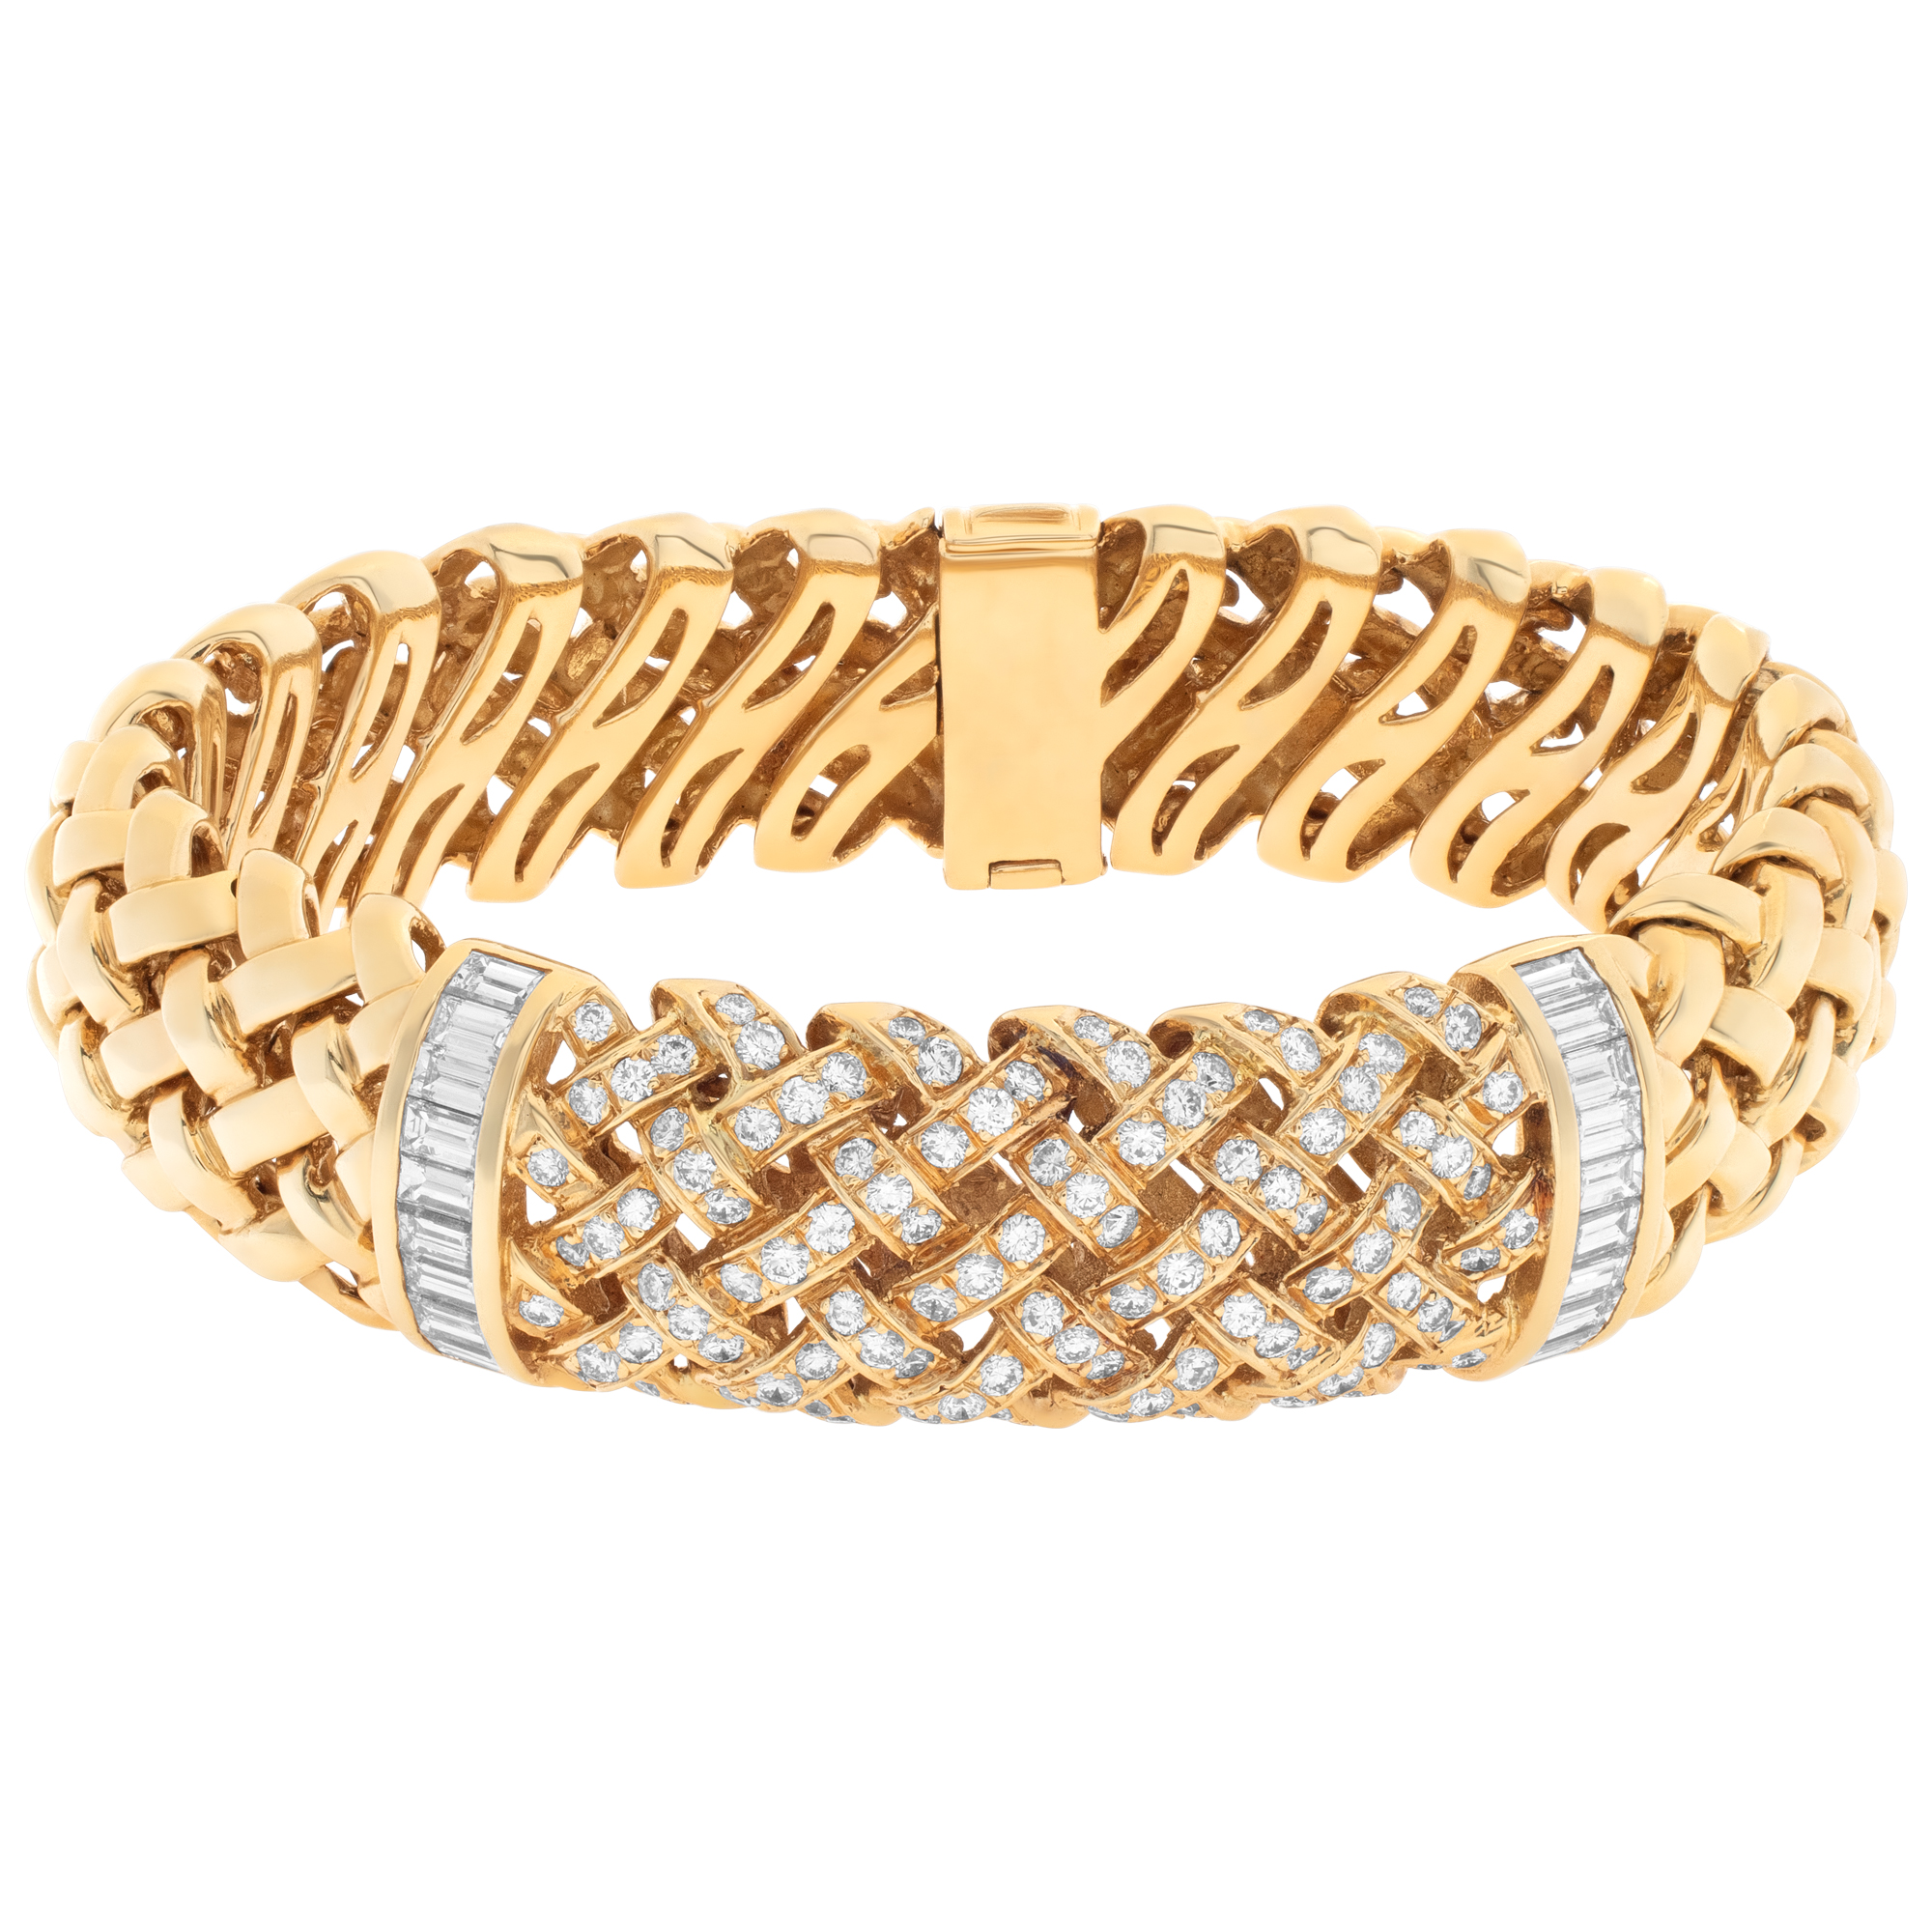 Tiffany & Co. VANNERIE Collection bracelet in 18K yellow gold image 1